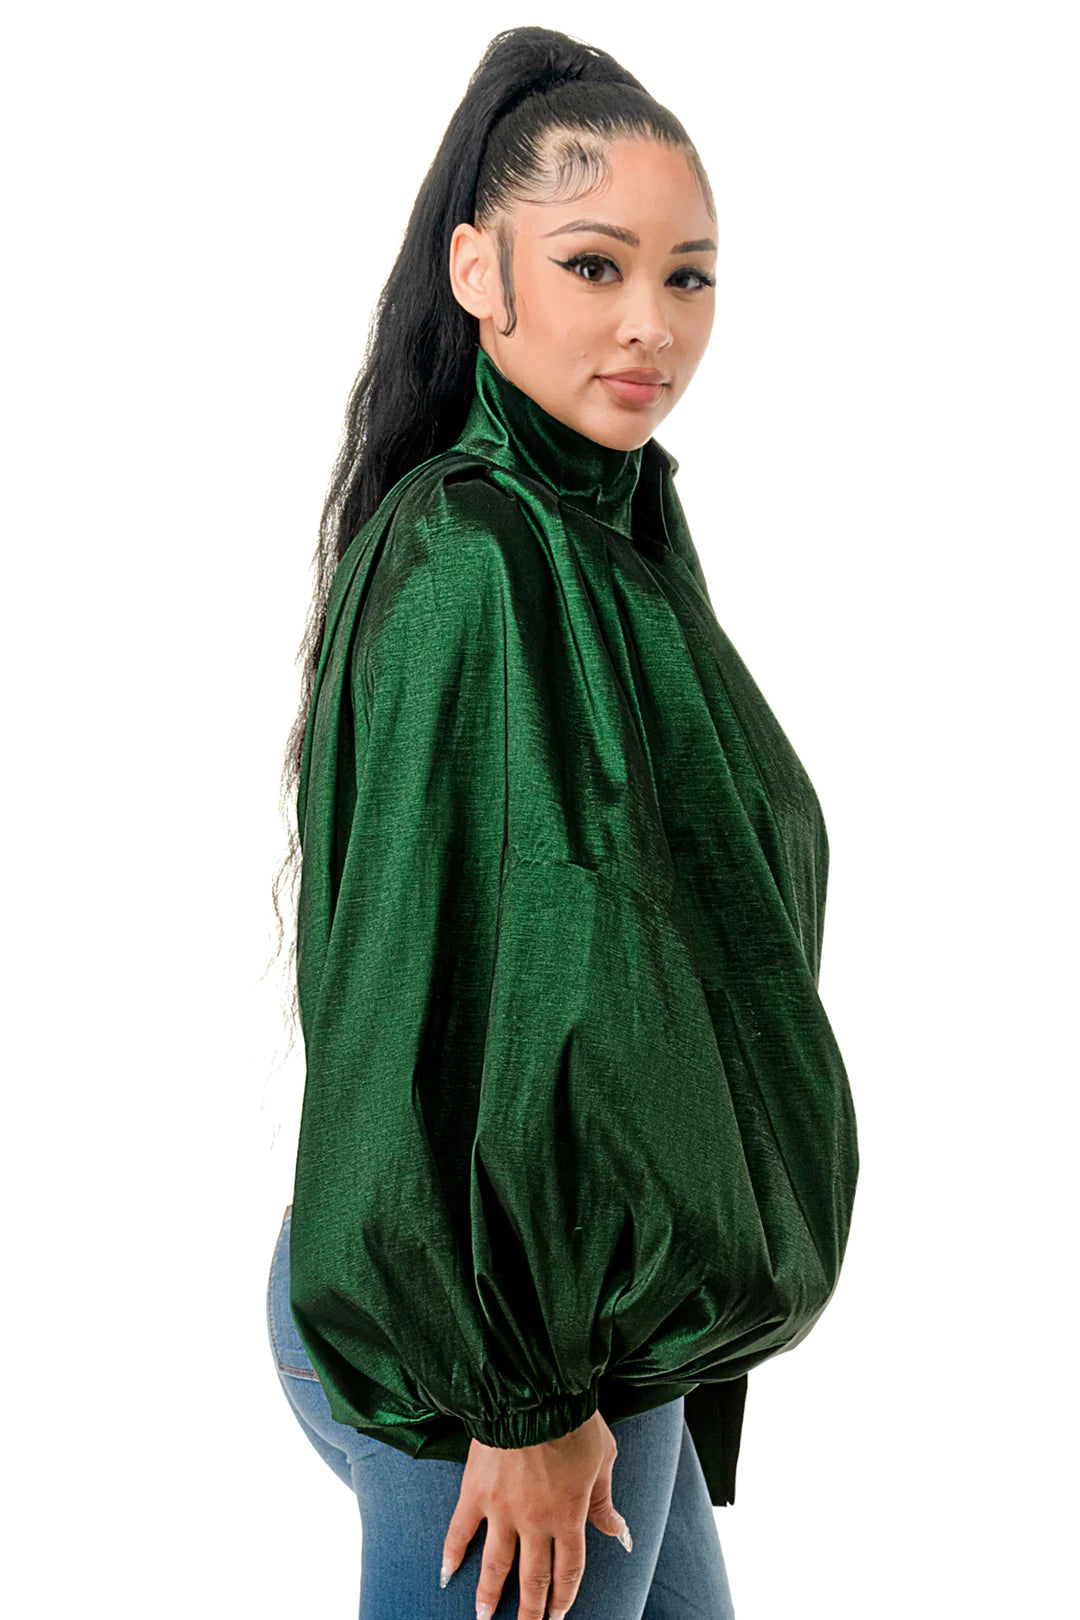 Hanna One sided Tie Top  (Emerald)